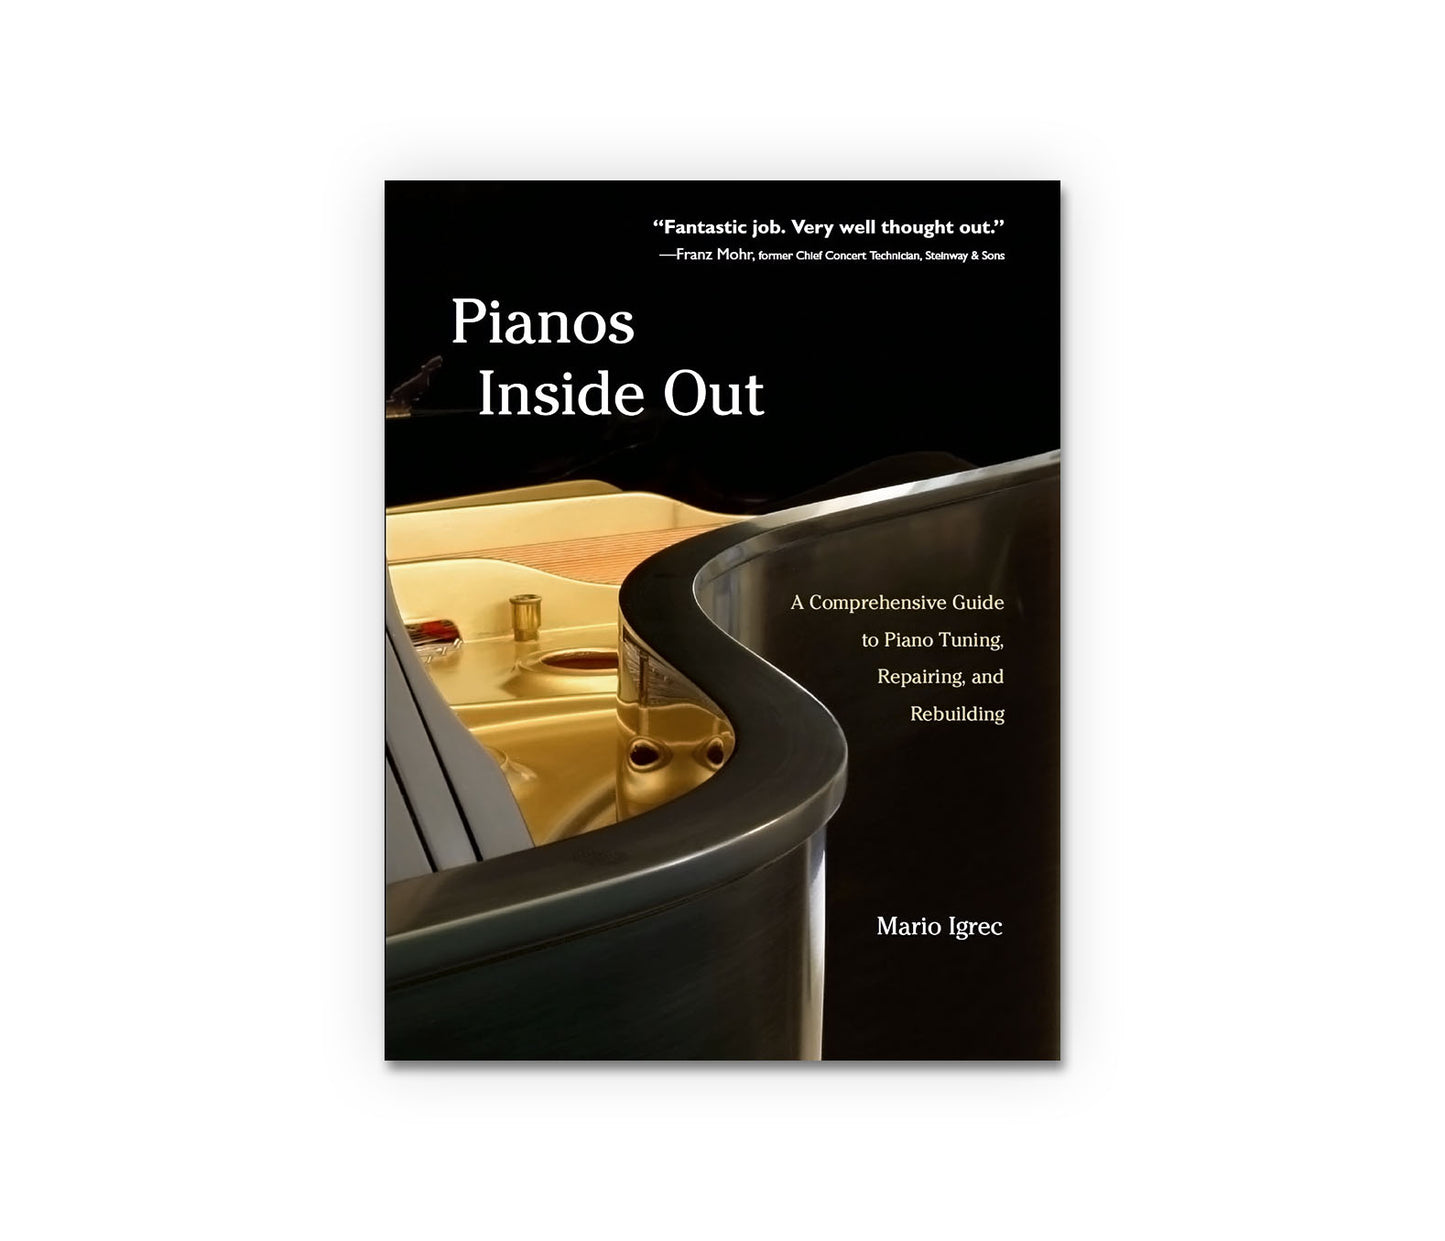 Pianos Inside Out